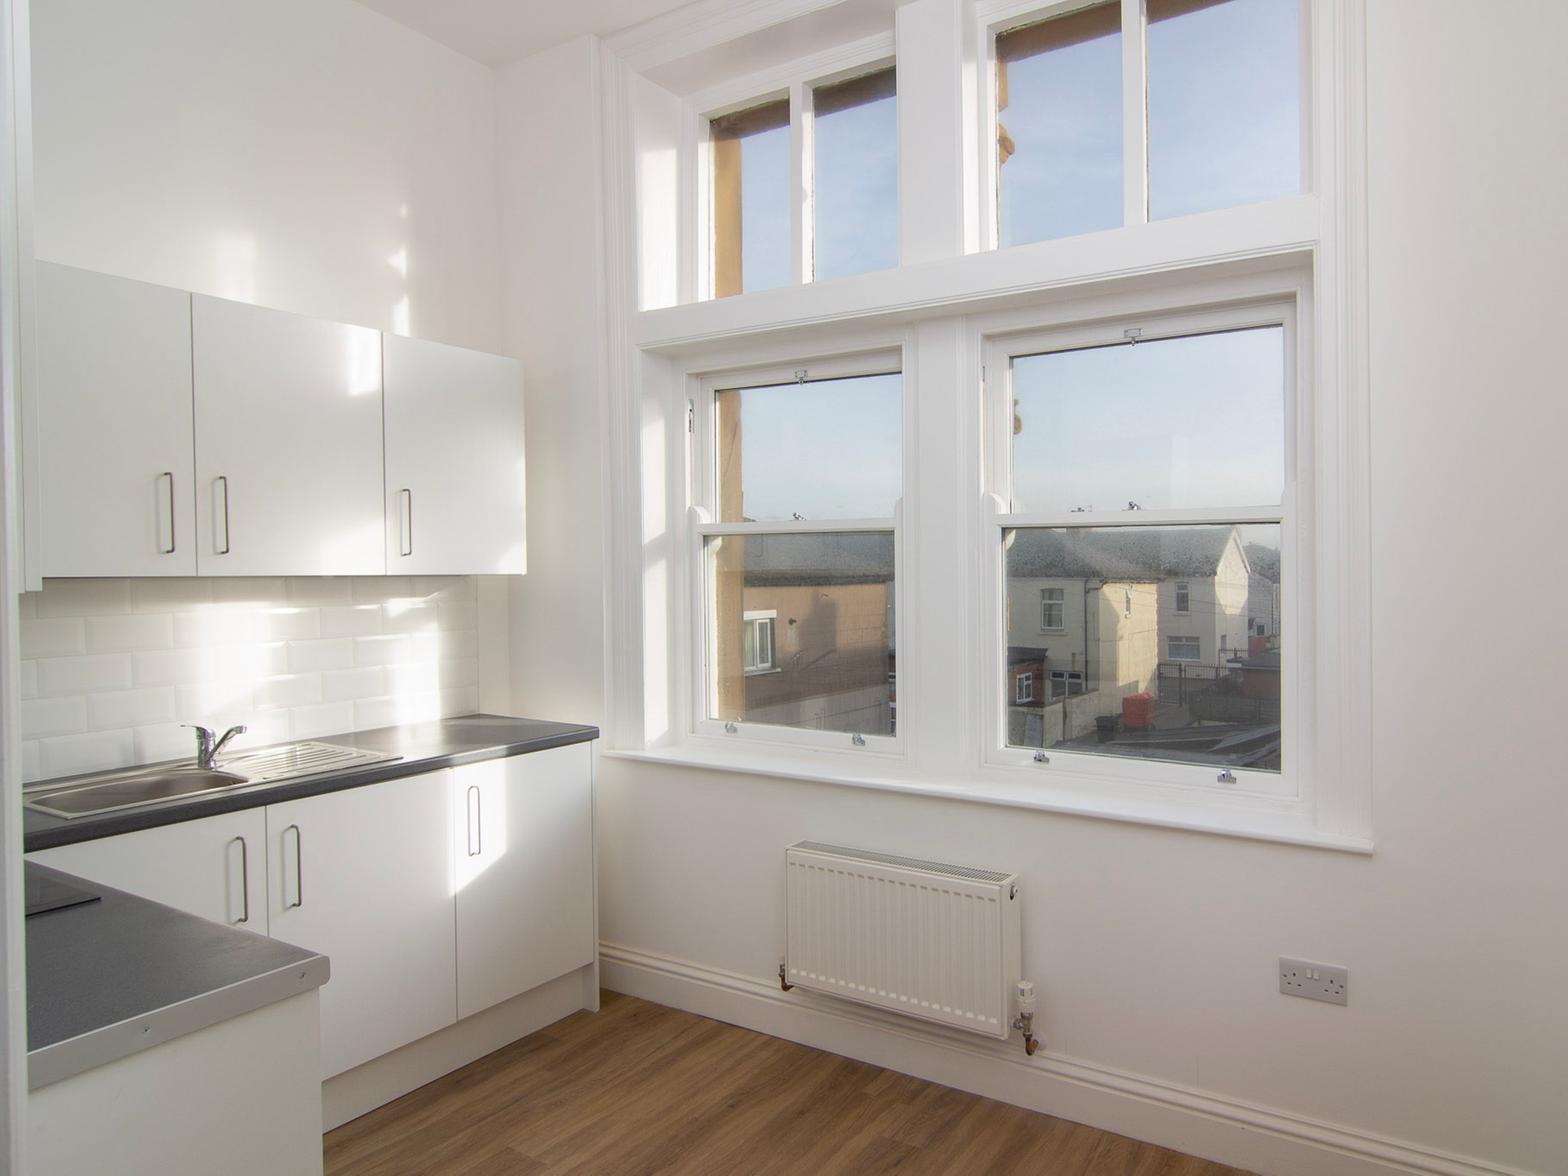 The original sash windows have been kept for the new flats (CREDIT: SOMA Projects)